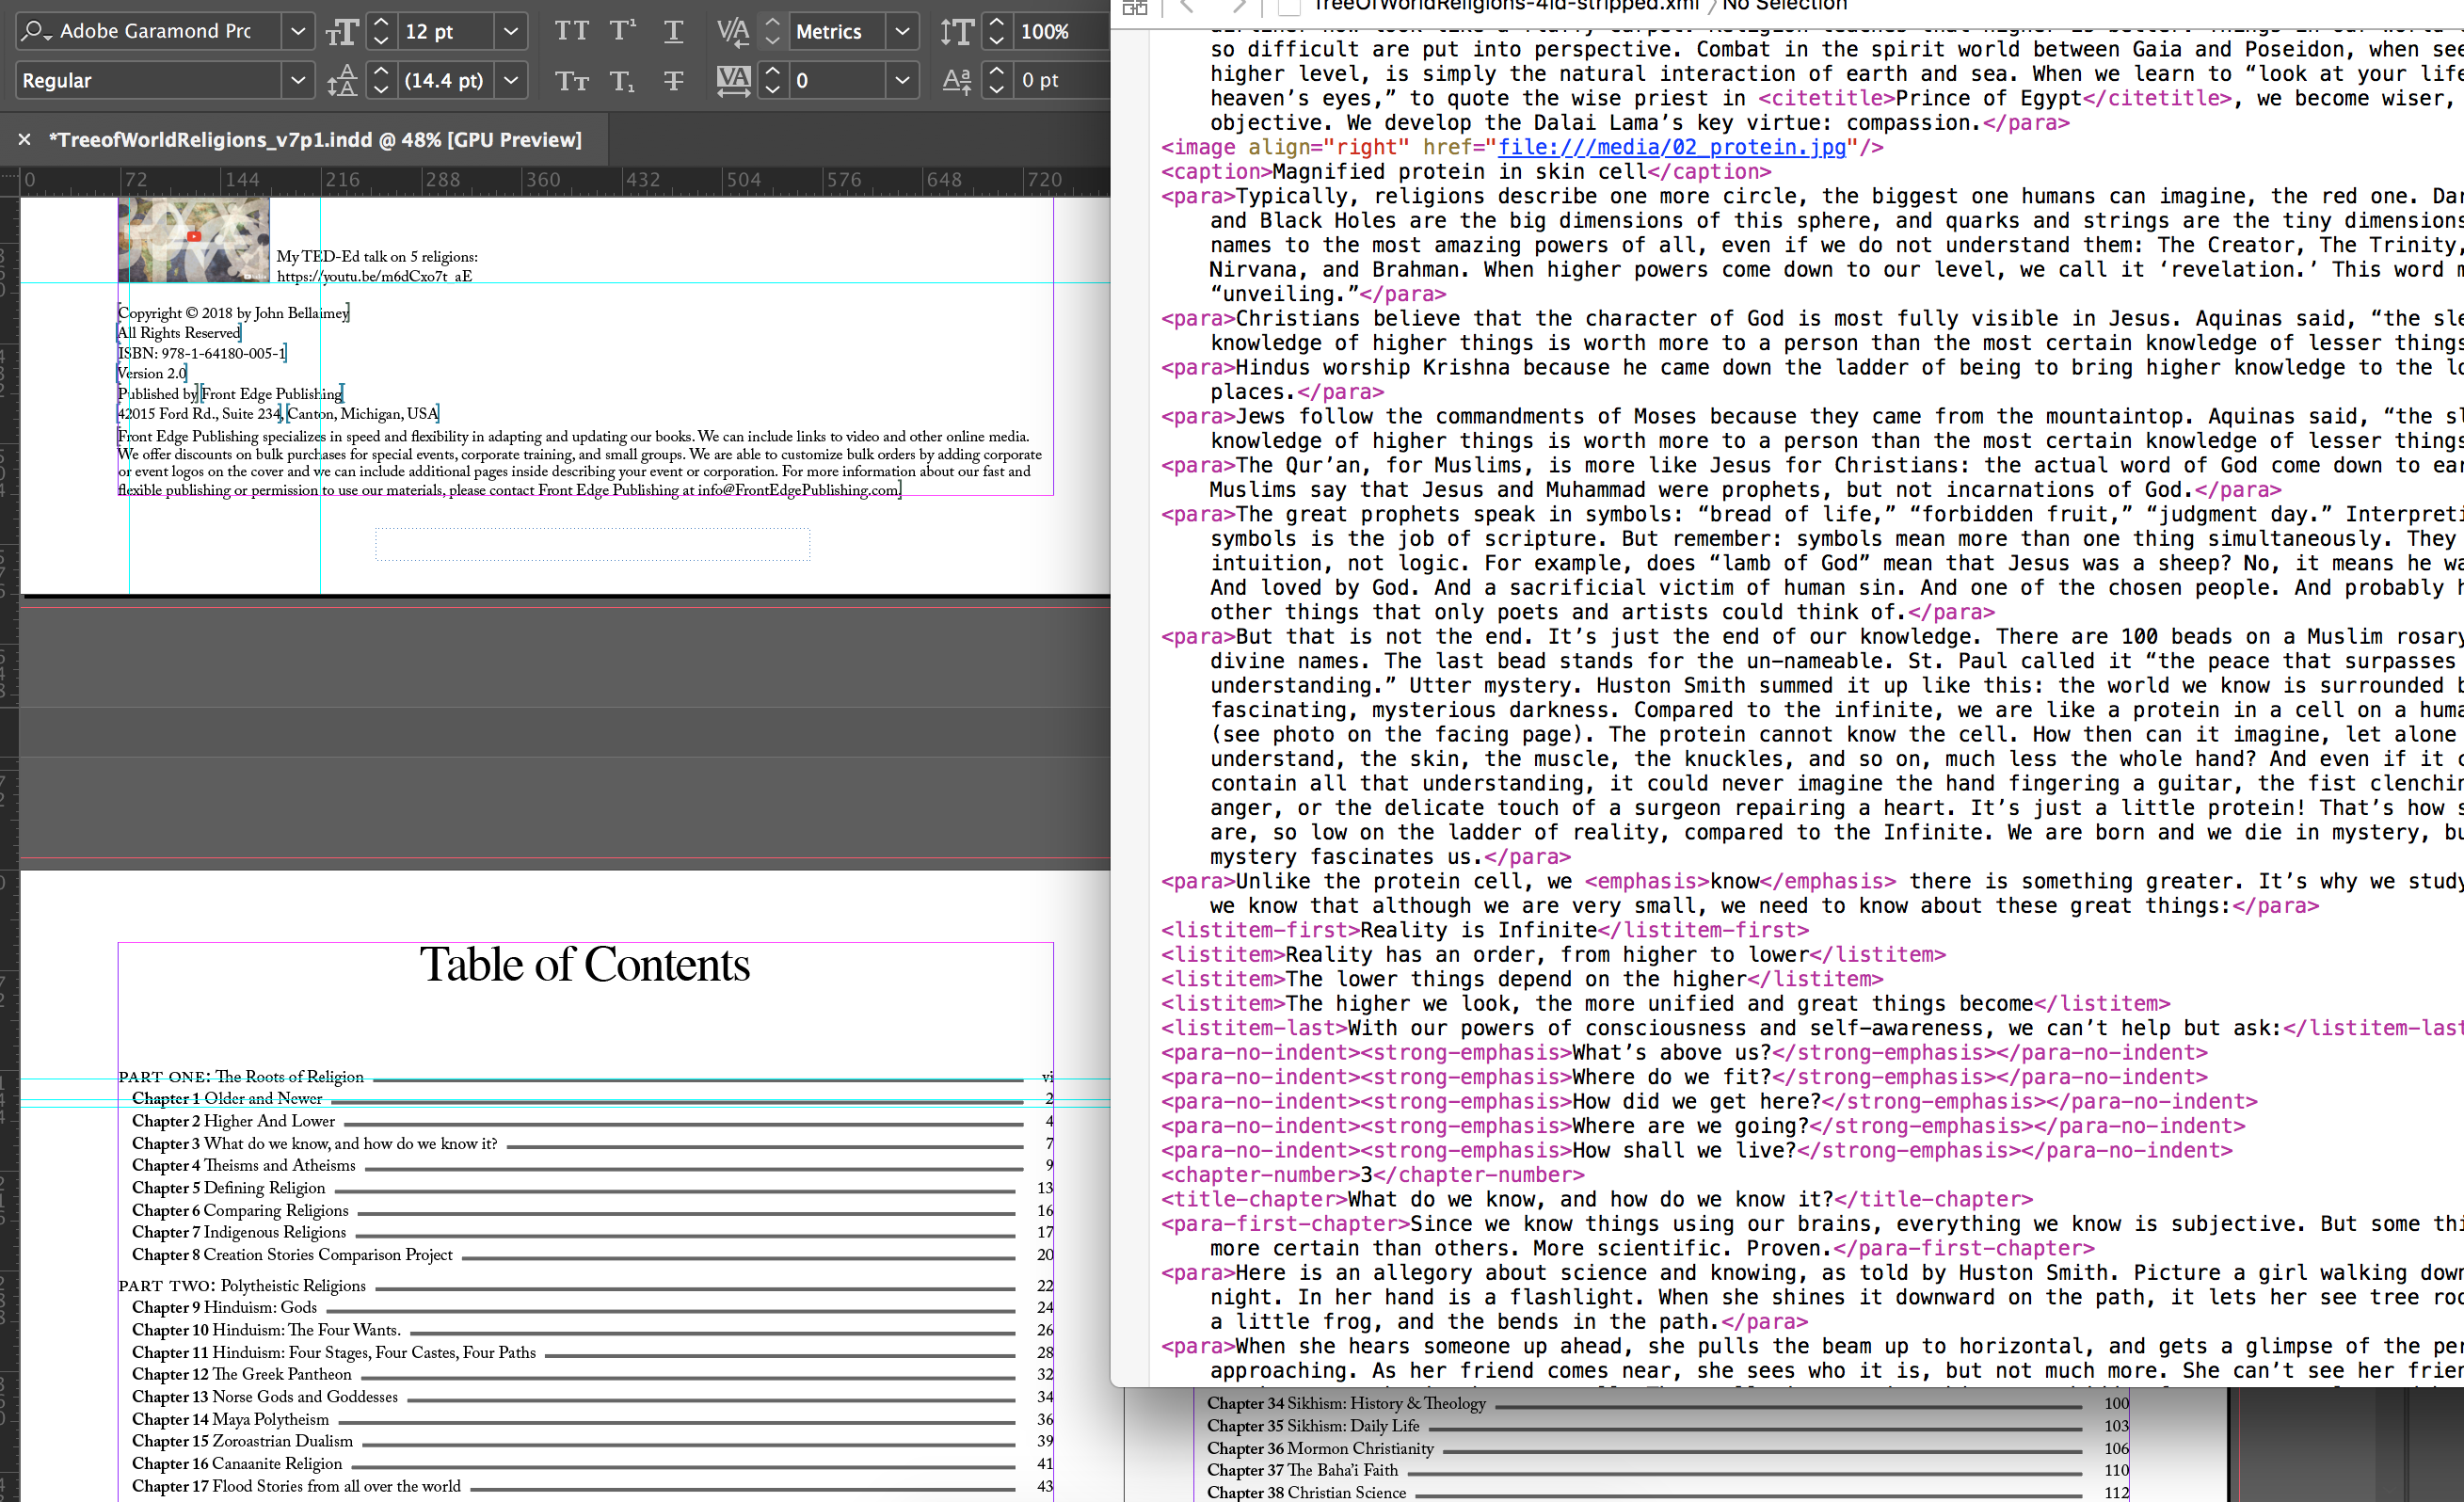 XML code used with Adobe InDesign to create a book layout